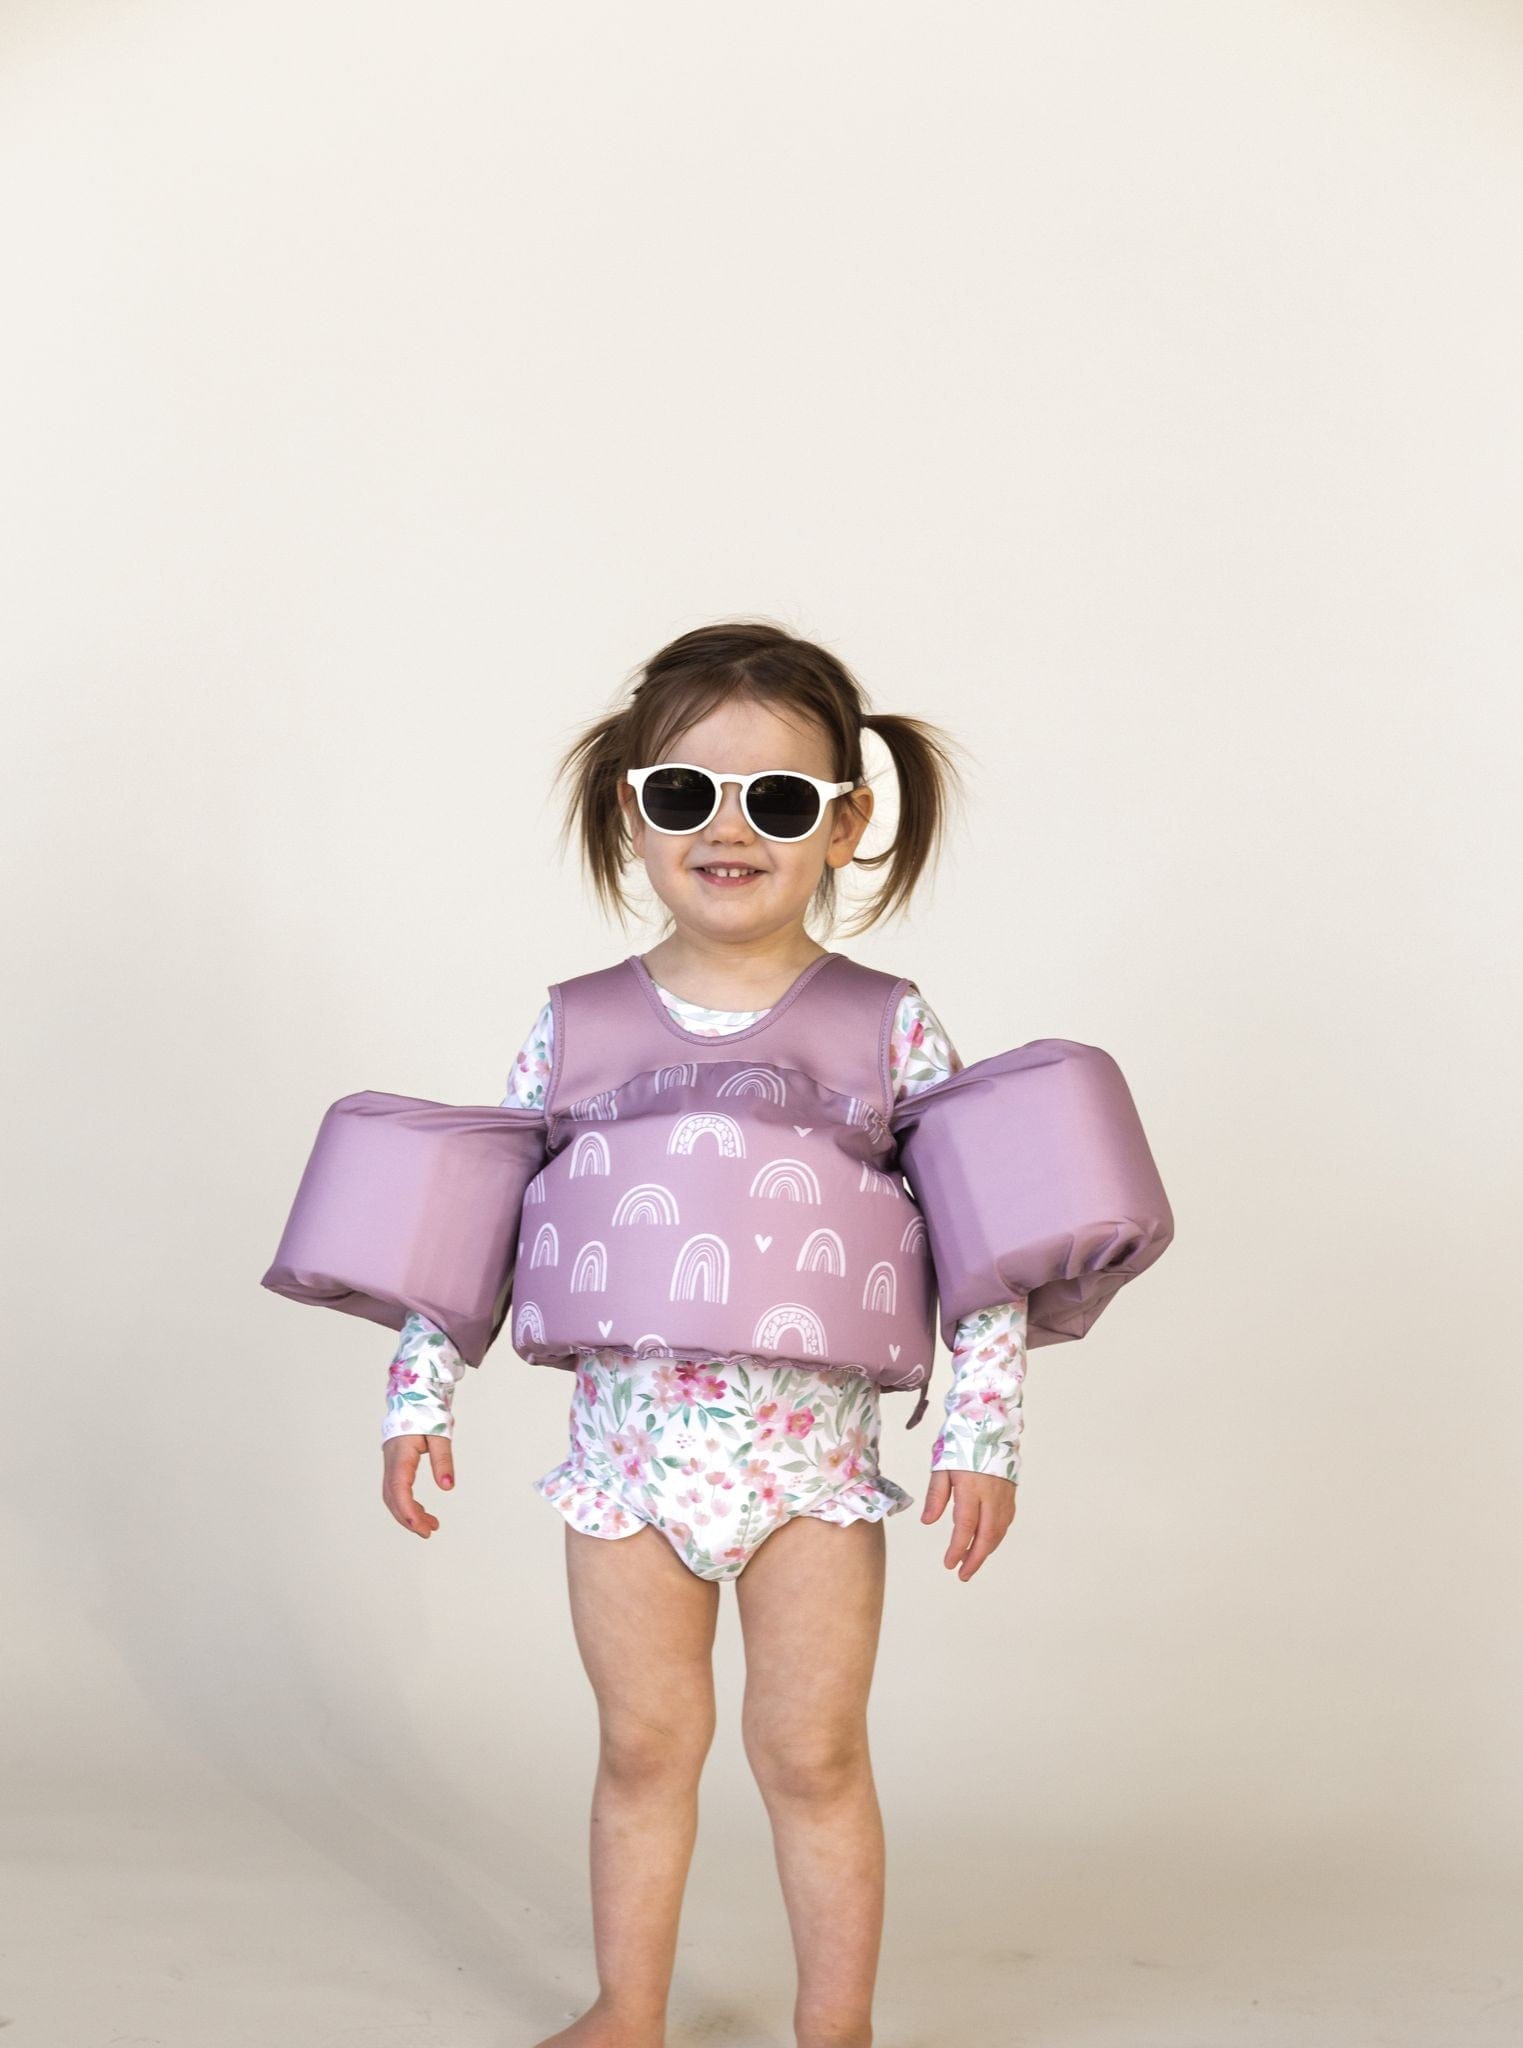 Current Tyed Children Accessories "Sea" You On Top Floaties